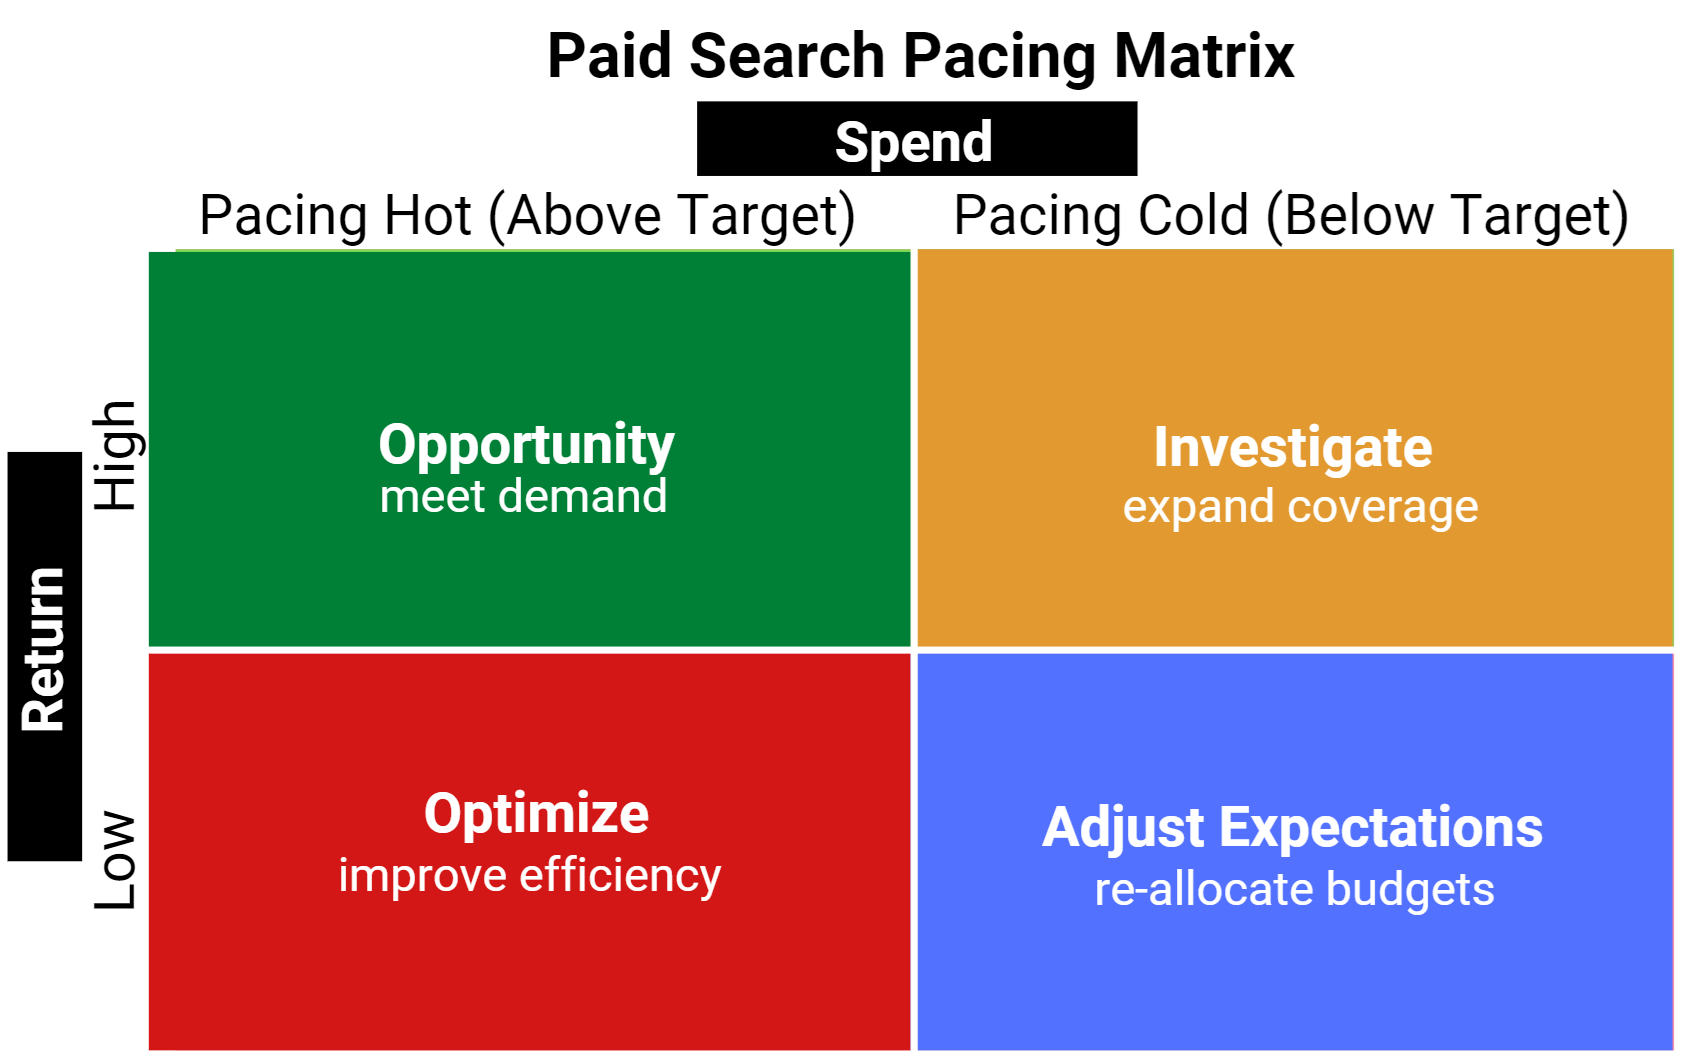 paid search pacing matrix: spend and return